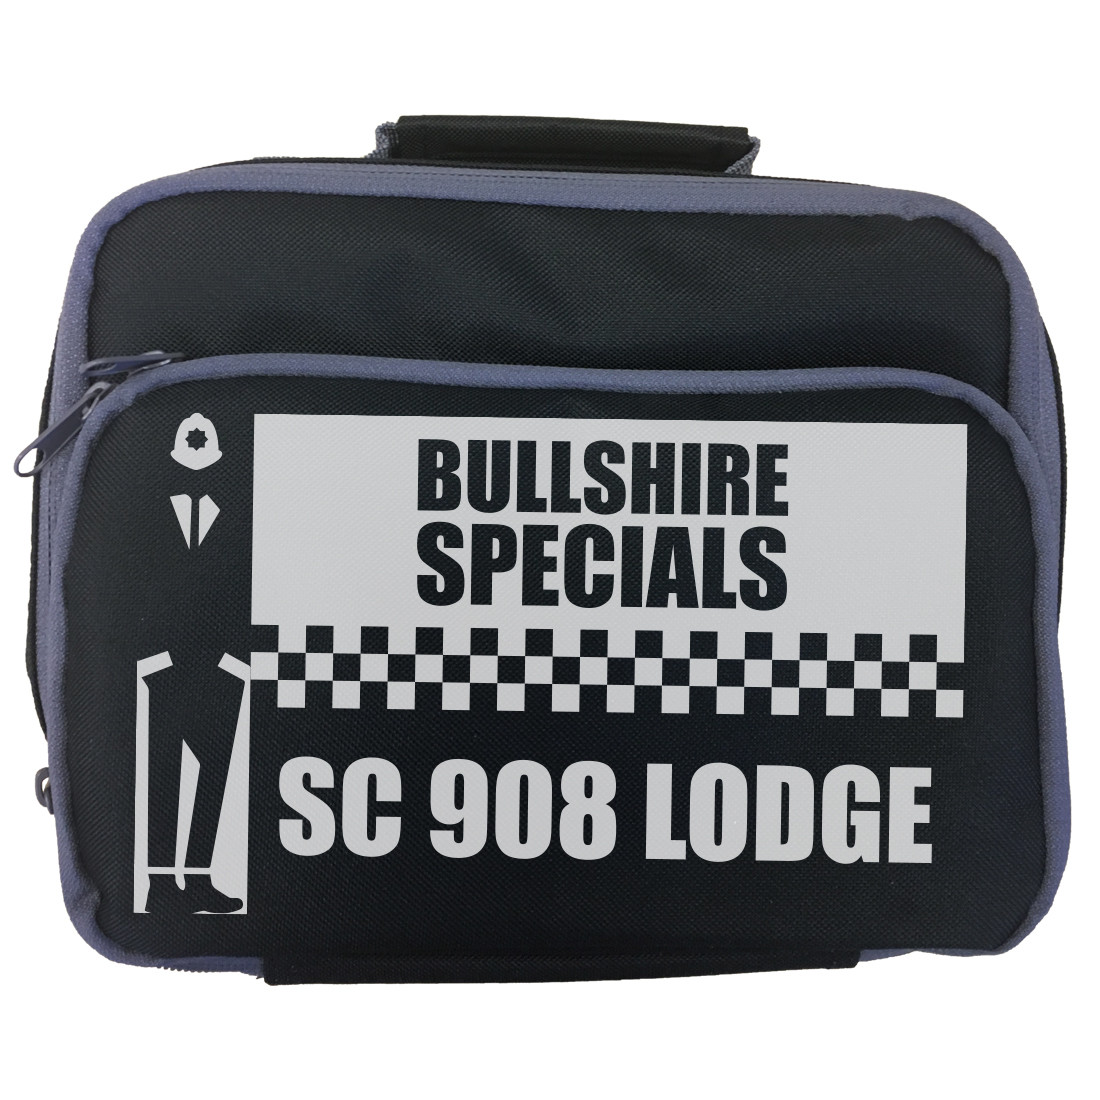 Personalised 'Bullshire Specials' Lunch Bag